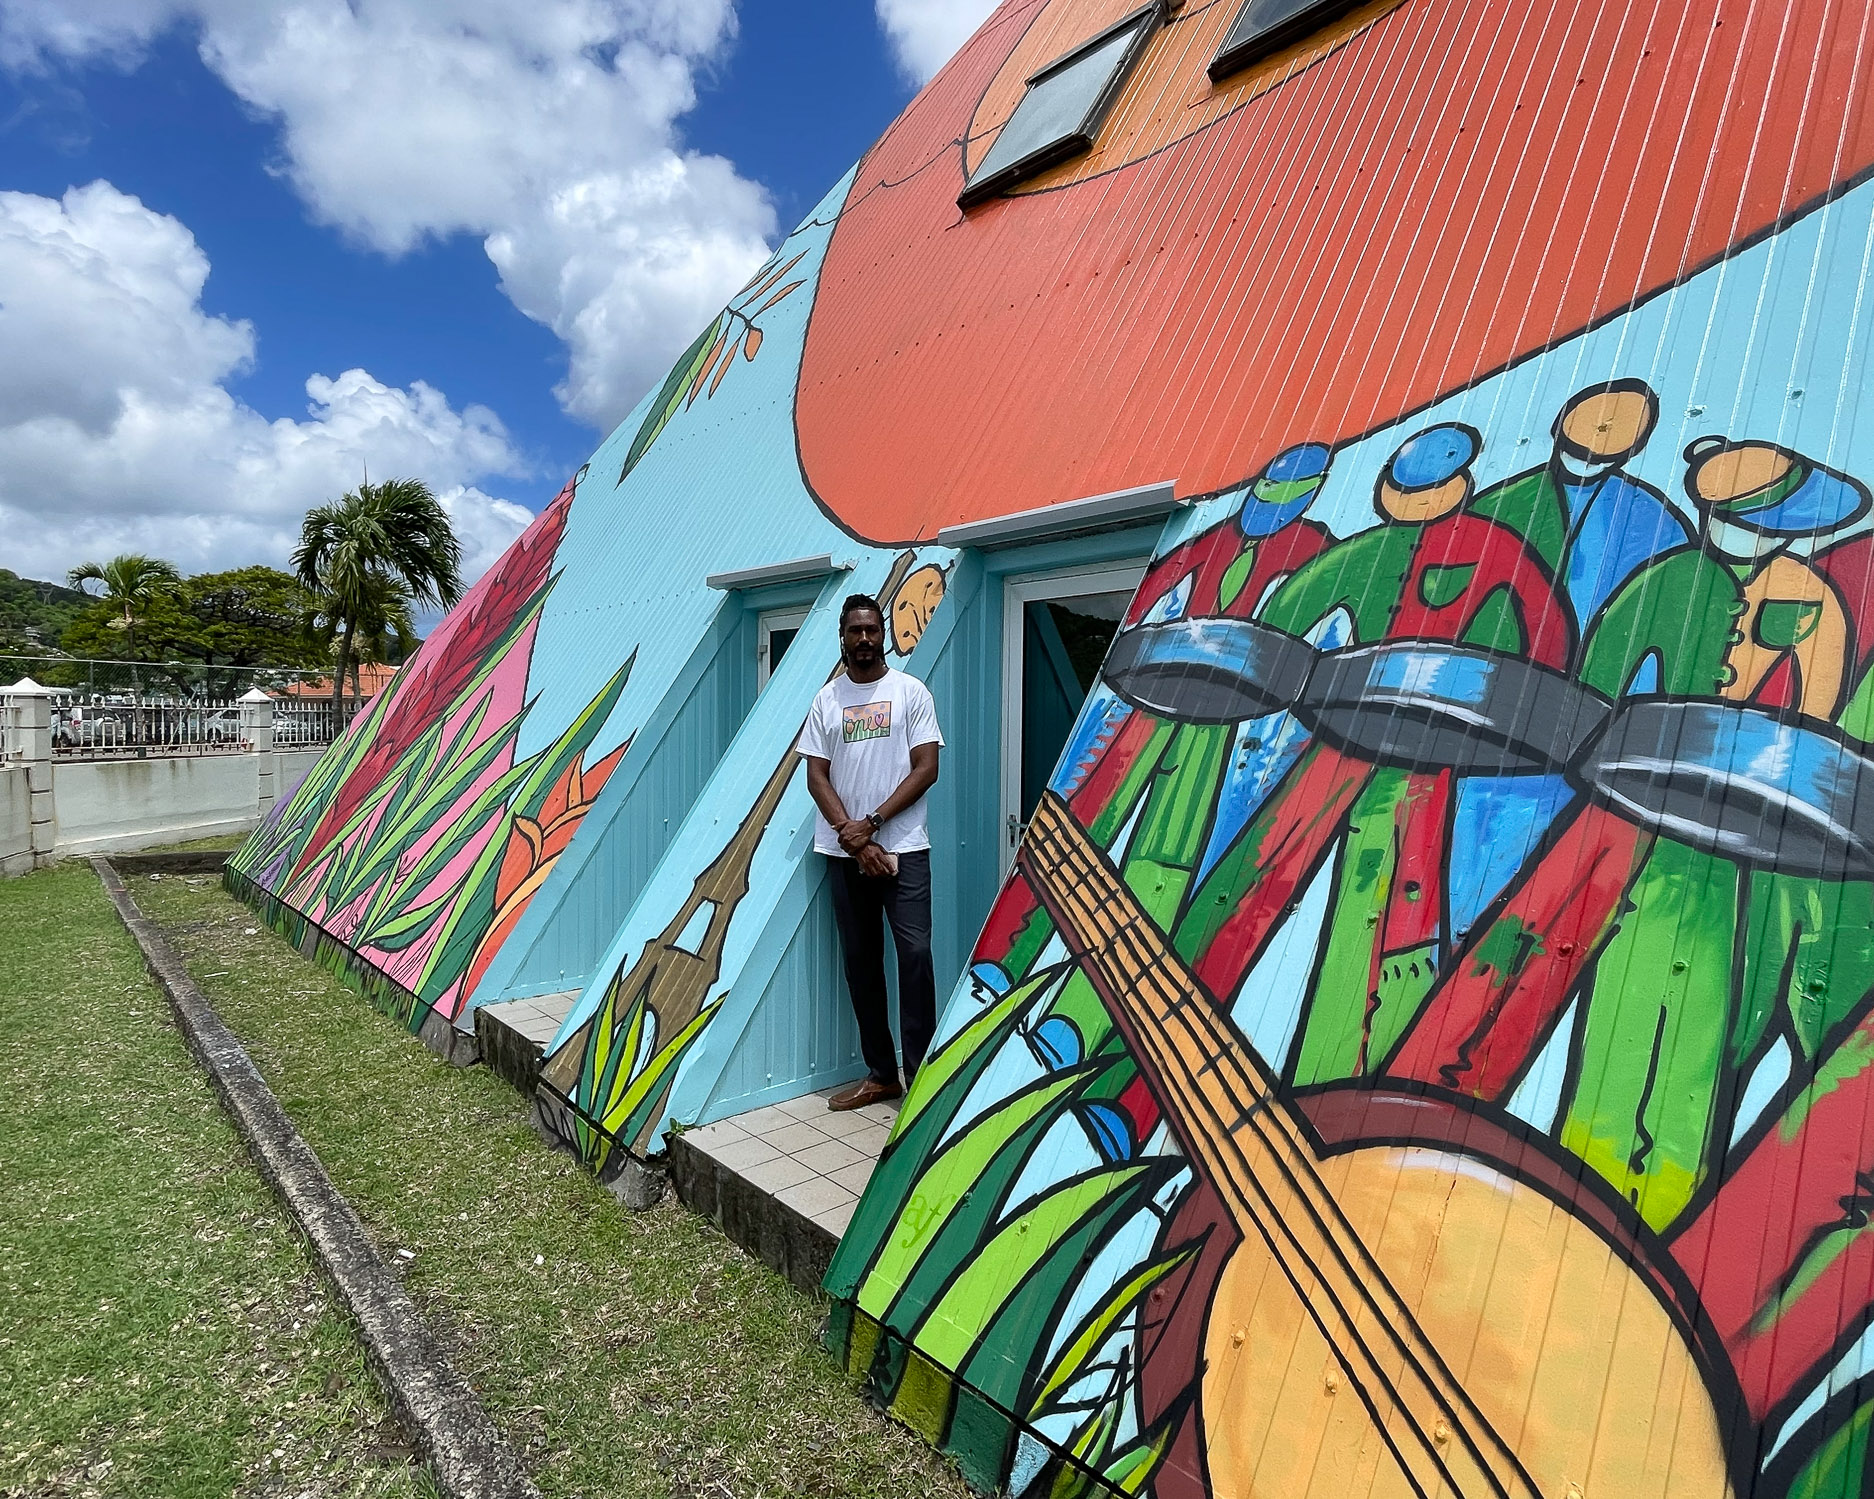 Saint Lucia artists – where to find murals, galleries and artists in St Lucia